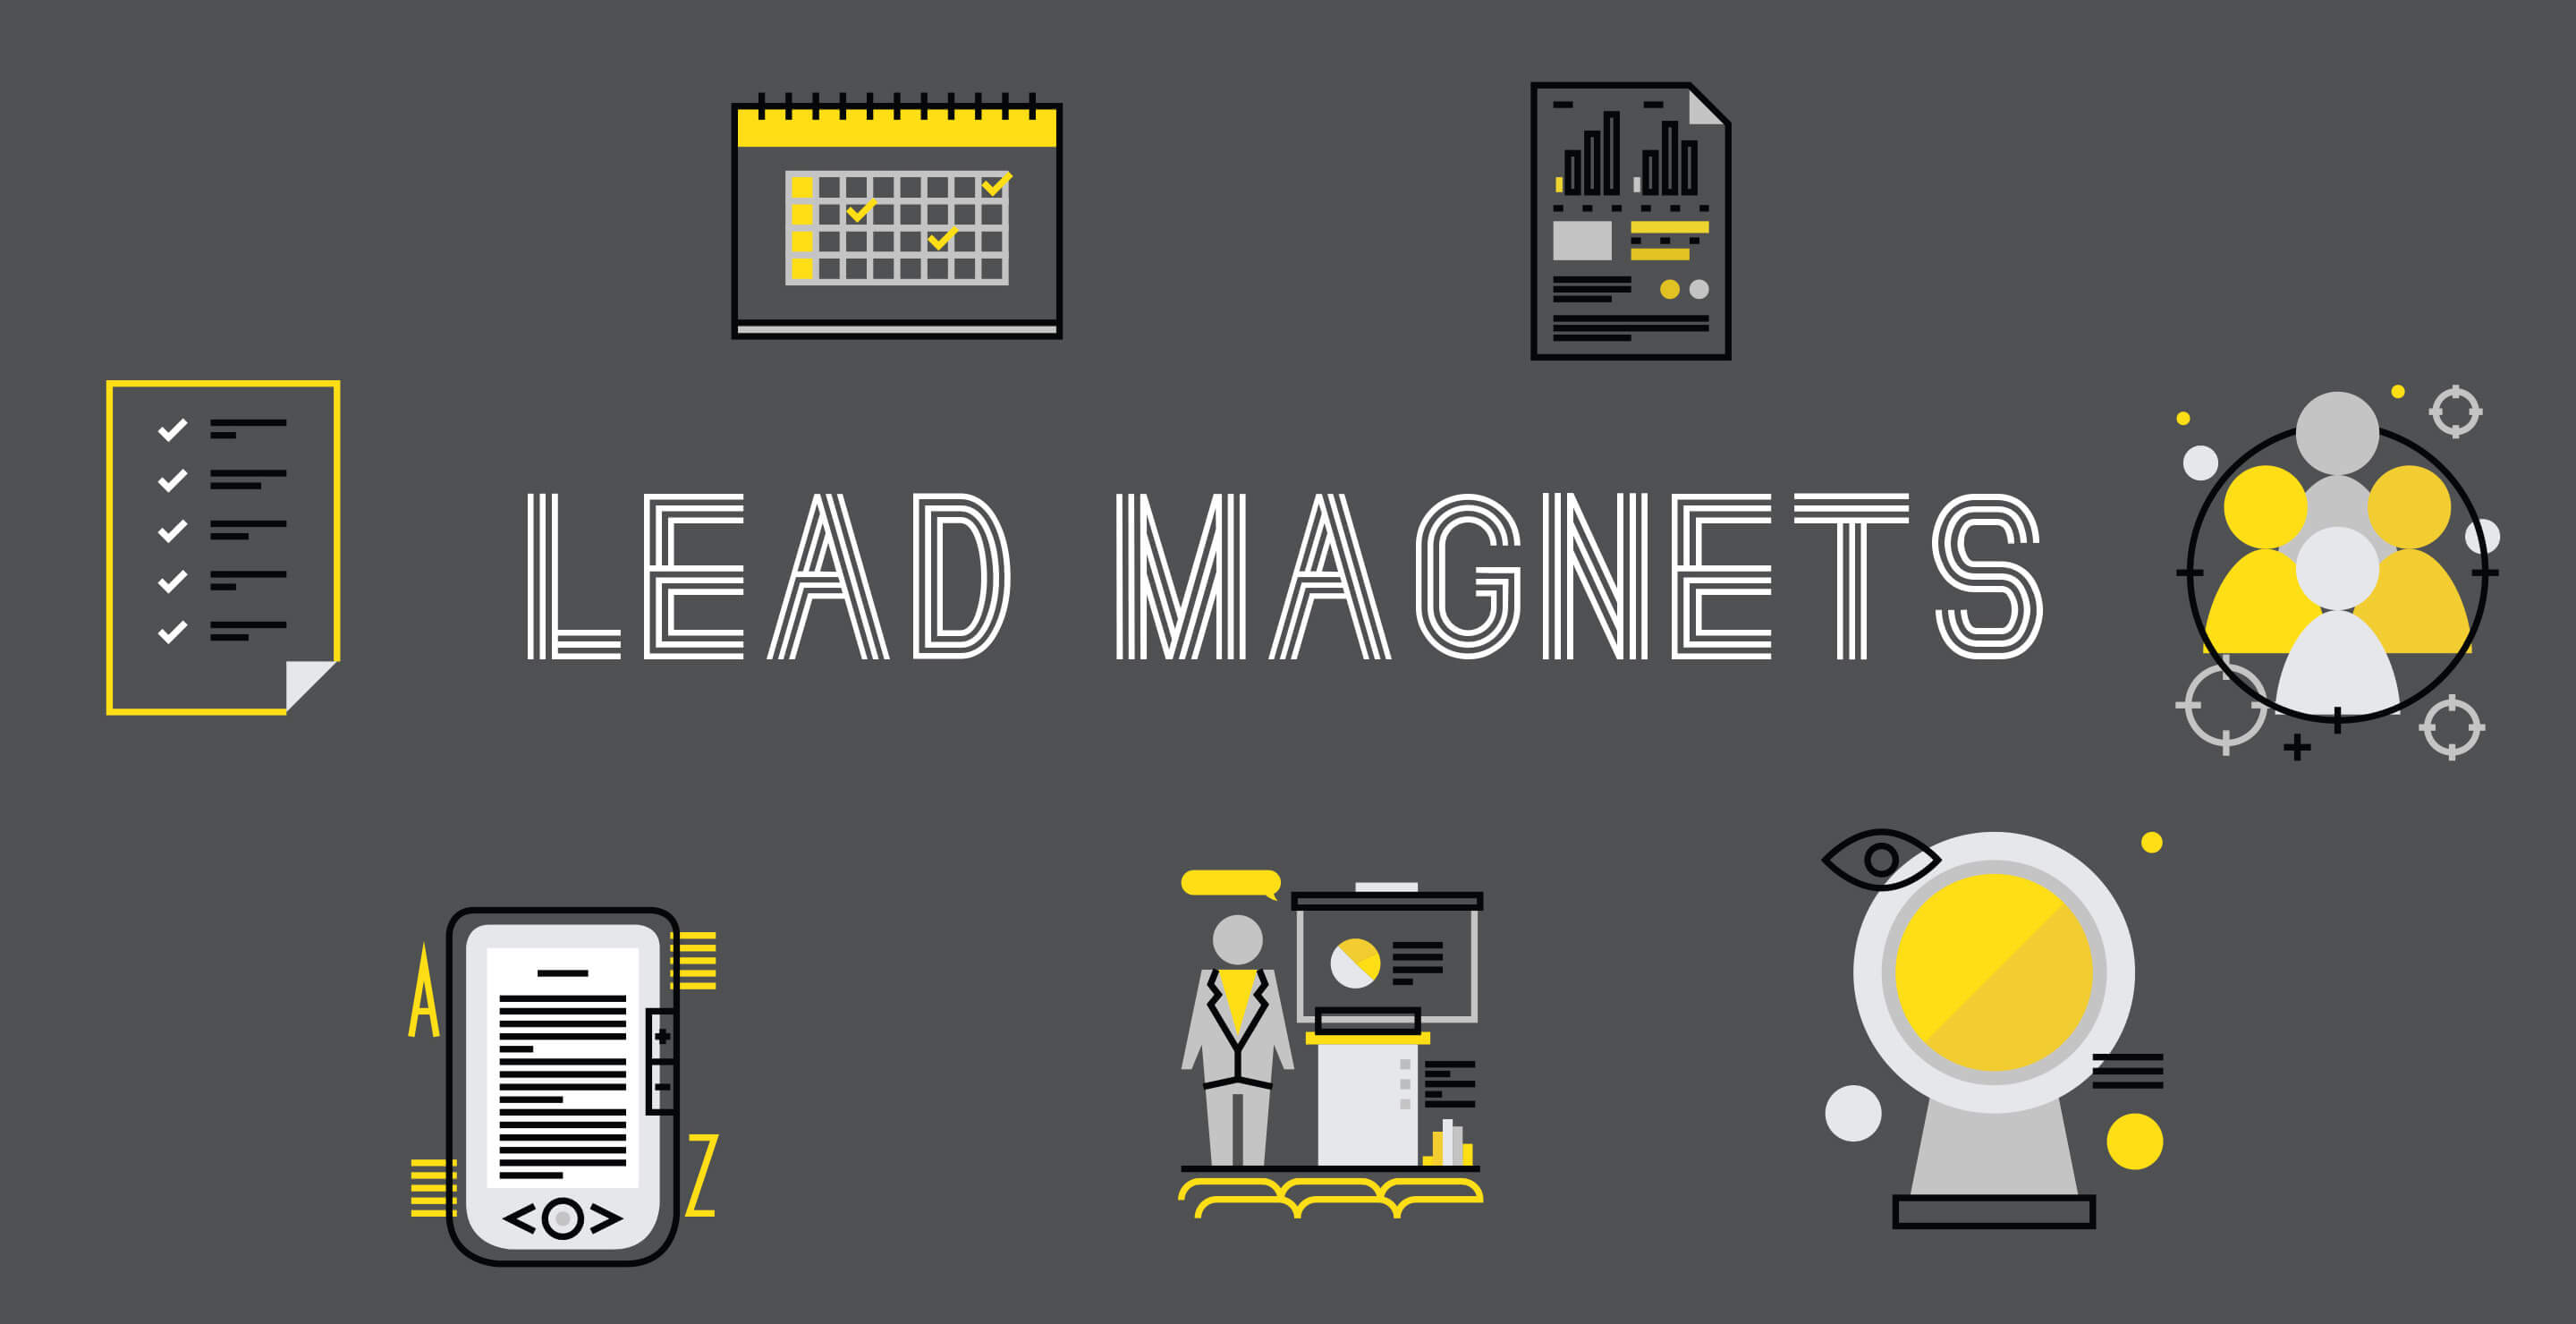 Blog---Lead-Generation-Magnets-for-SaaS-and-Technology-Companies-Image.jpg